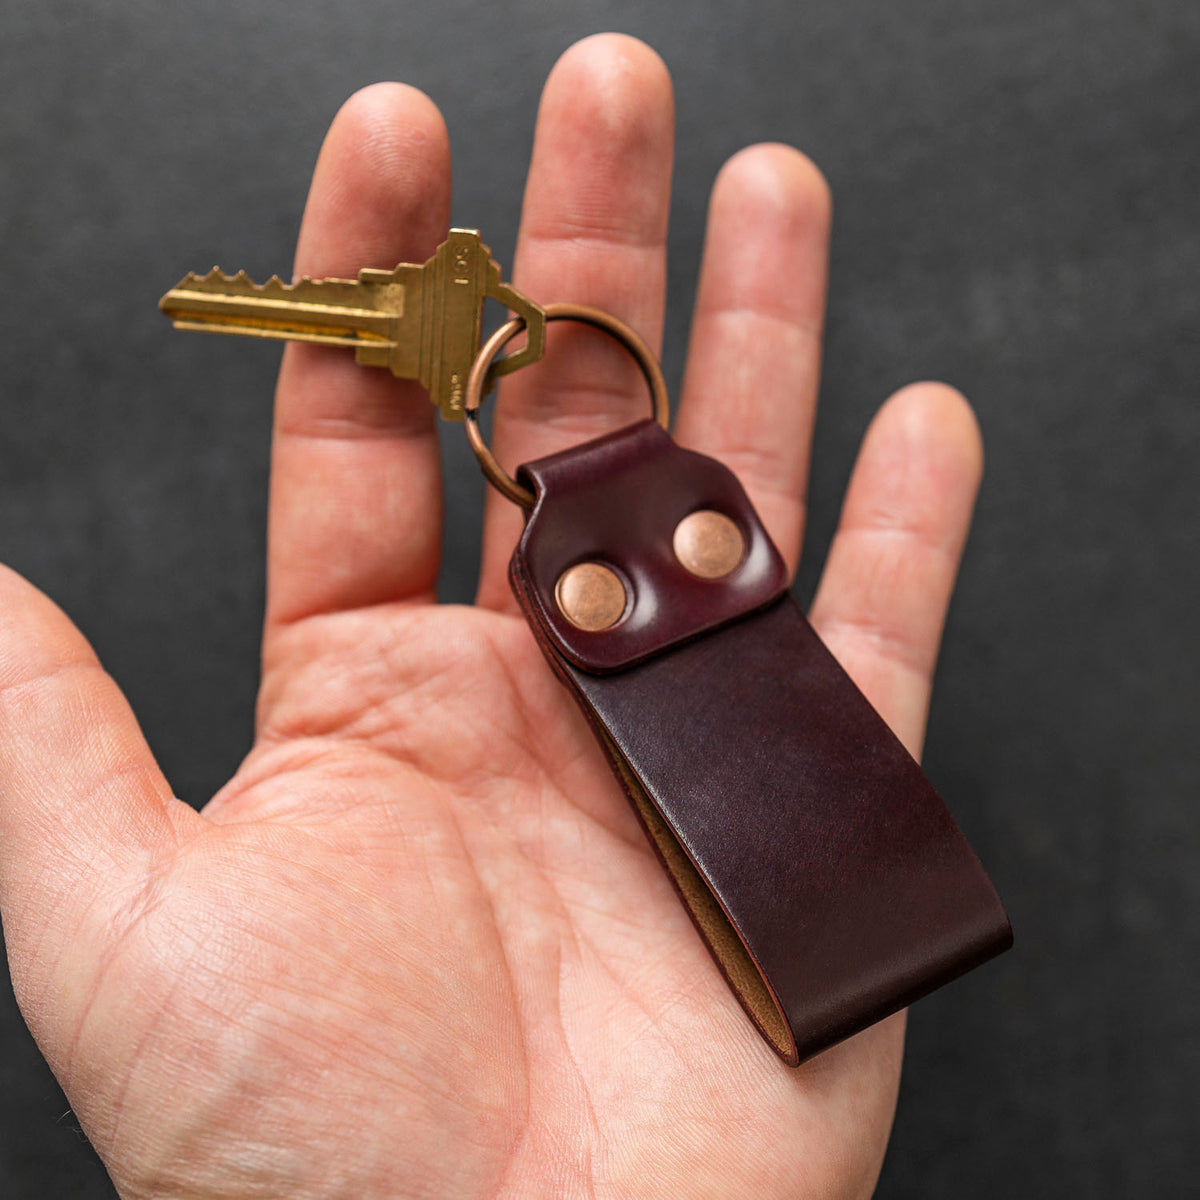 Leather Key Accessories